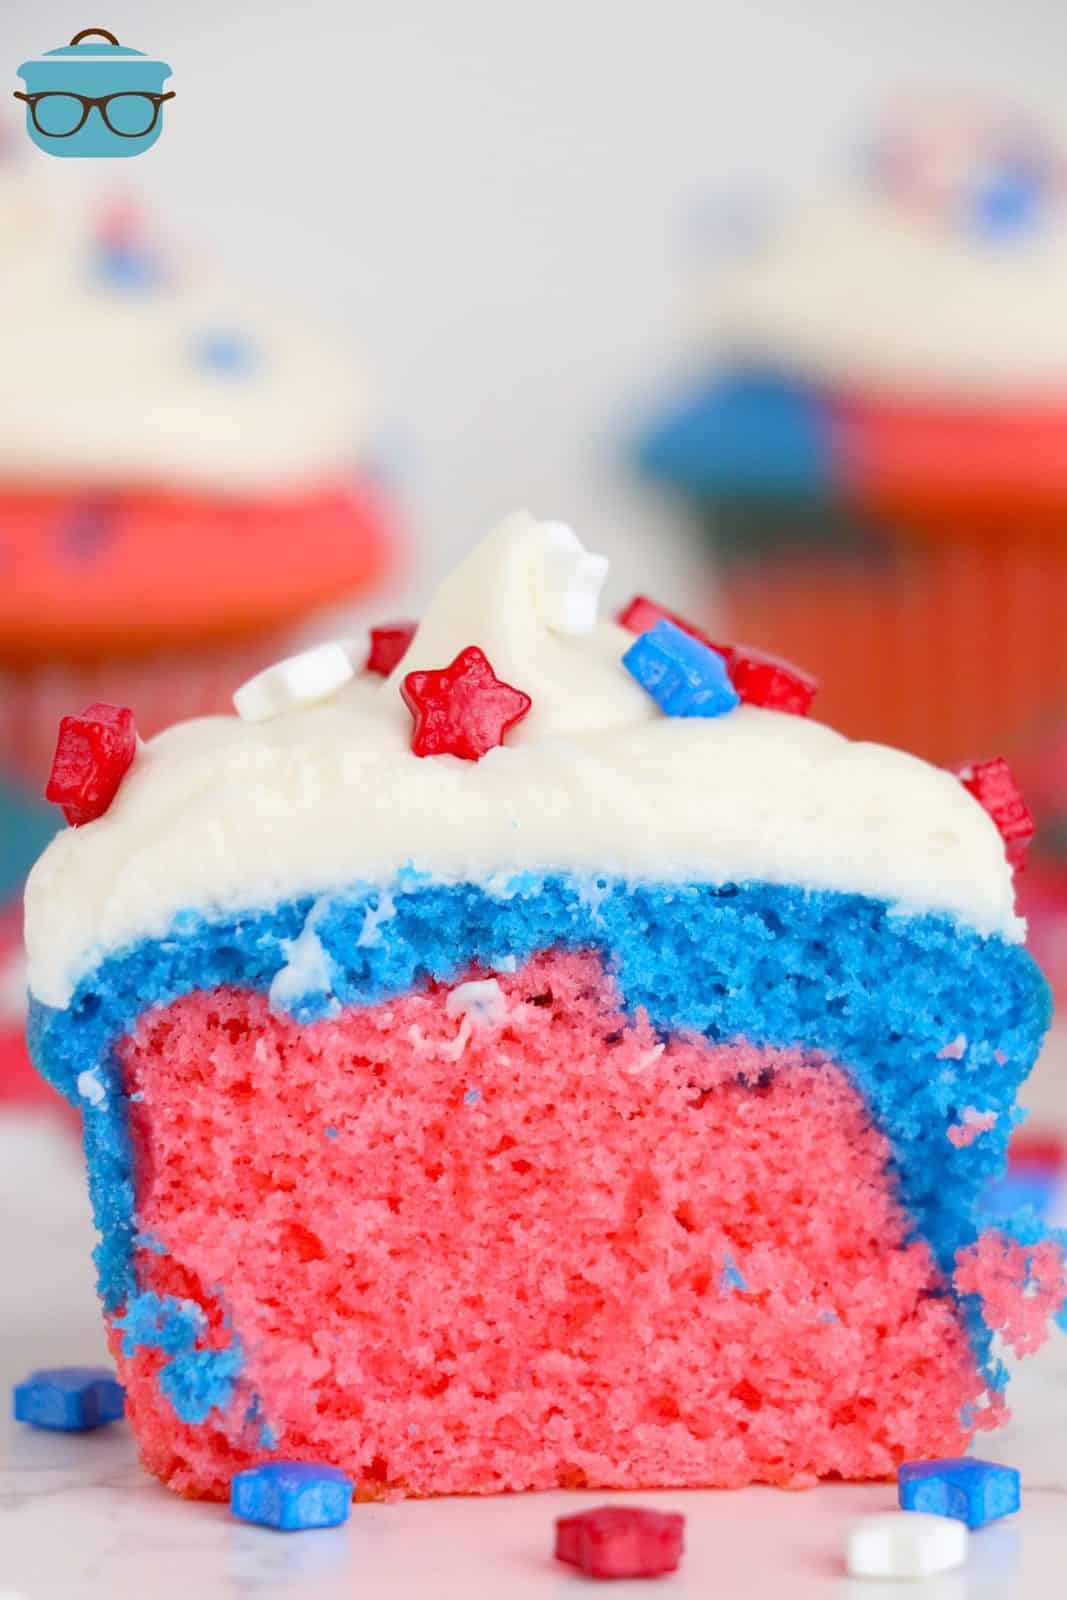 One of the Red, White and Blue Cupcakes cut in half showing the colors of the inside.